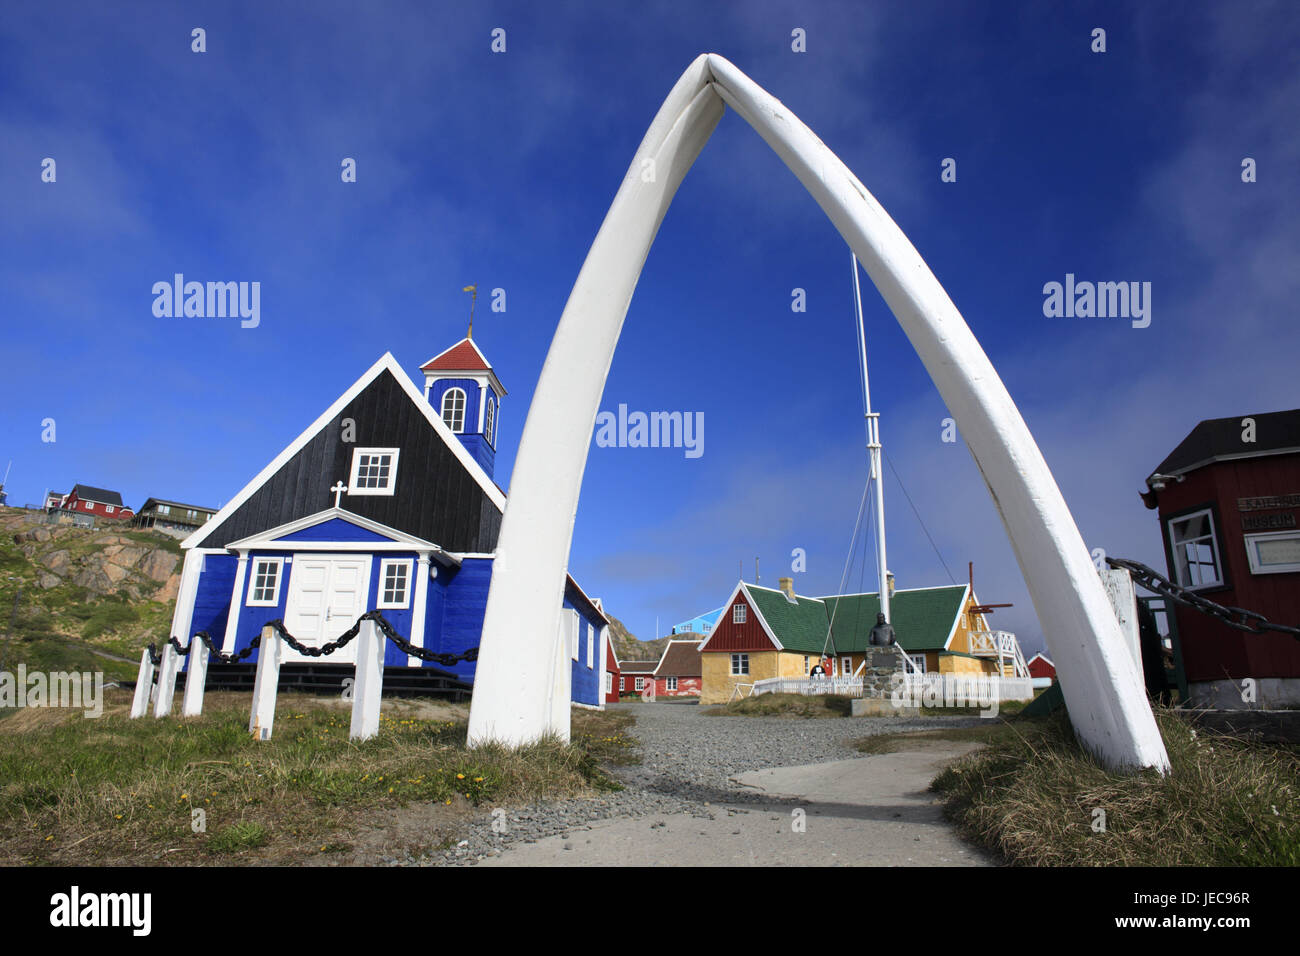 Greenland, Sisimiut, town input, gate, whale bone, Western Greenland, town, town gate, input, gate, houses, timber houses, church, timber-frame construction way, bone, passage, tremendously, sky, blue, outside, deserted, Stock Photo